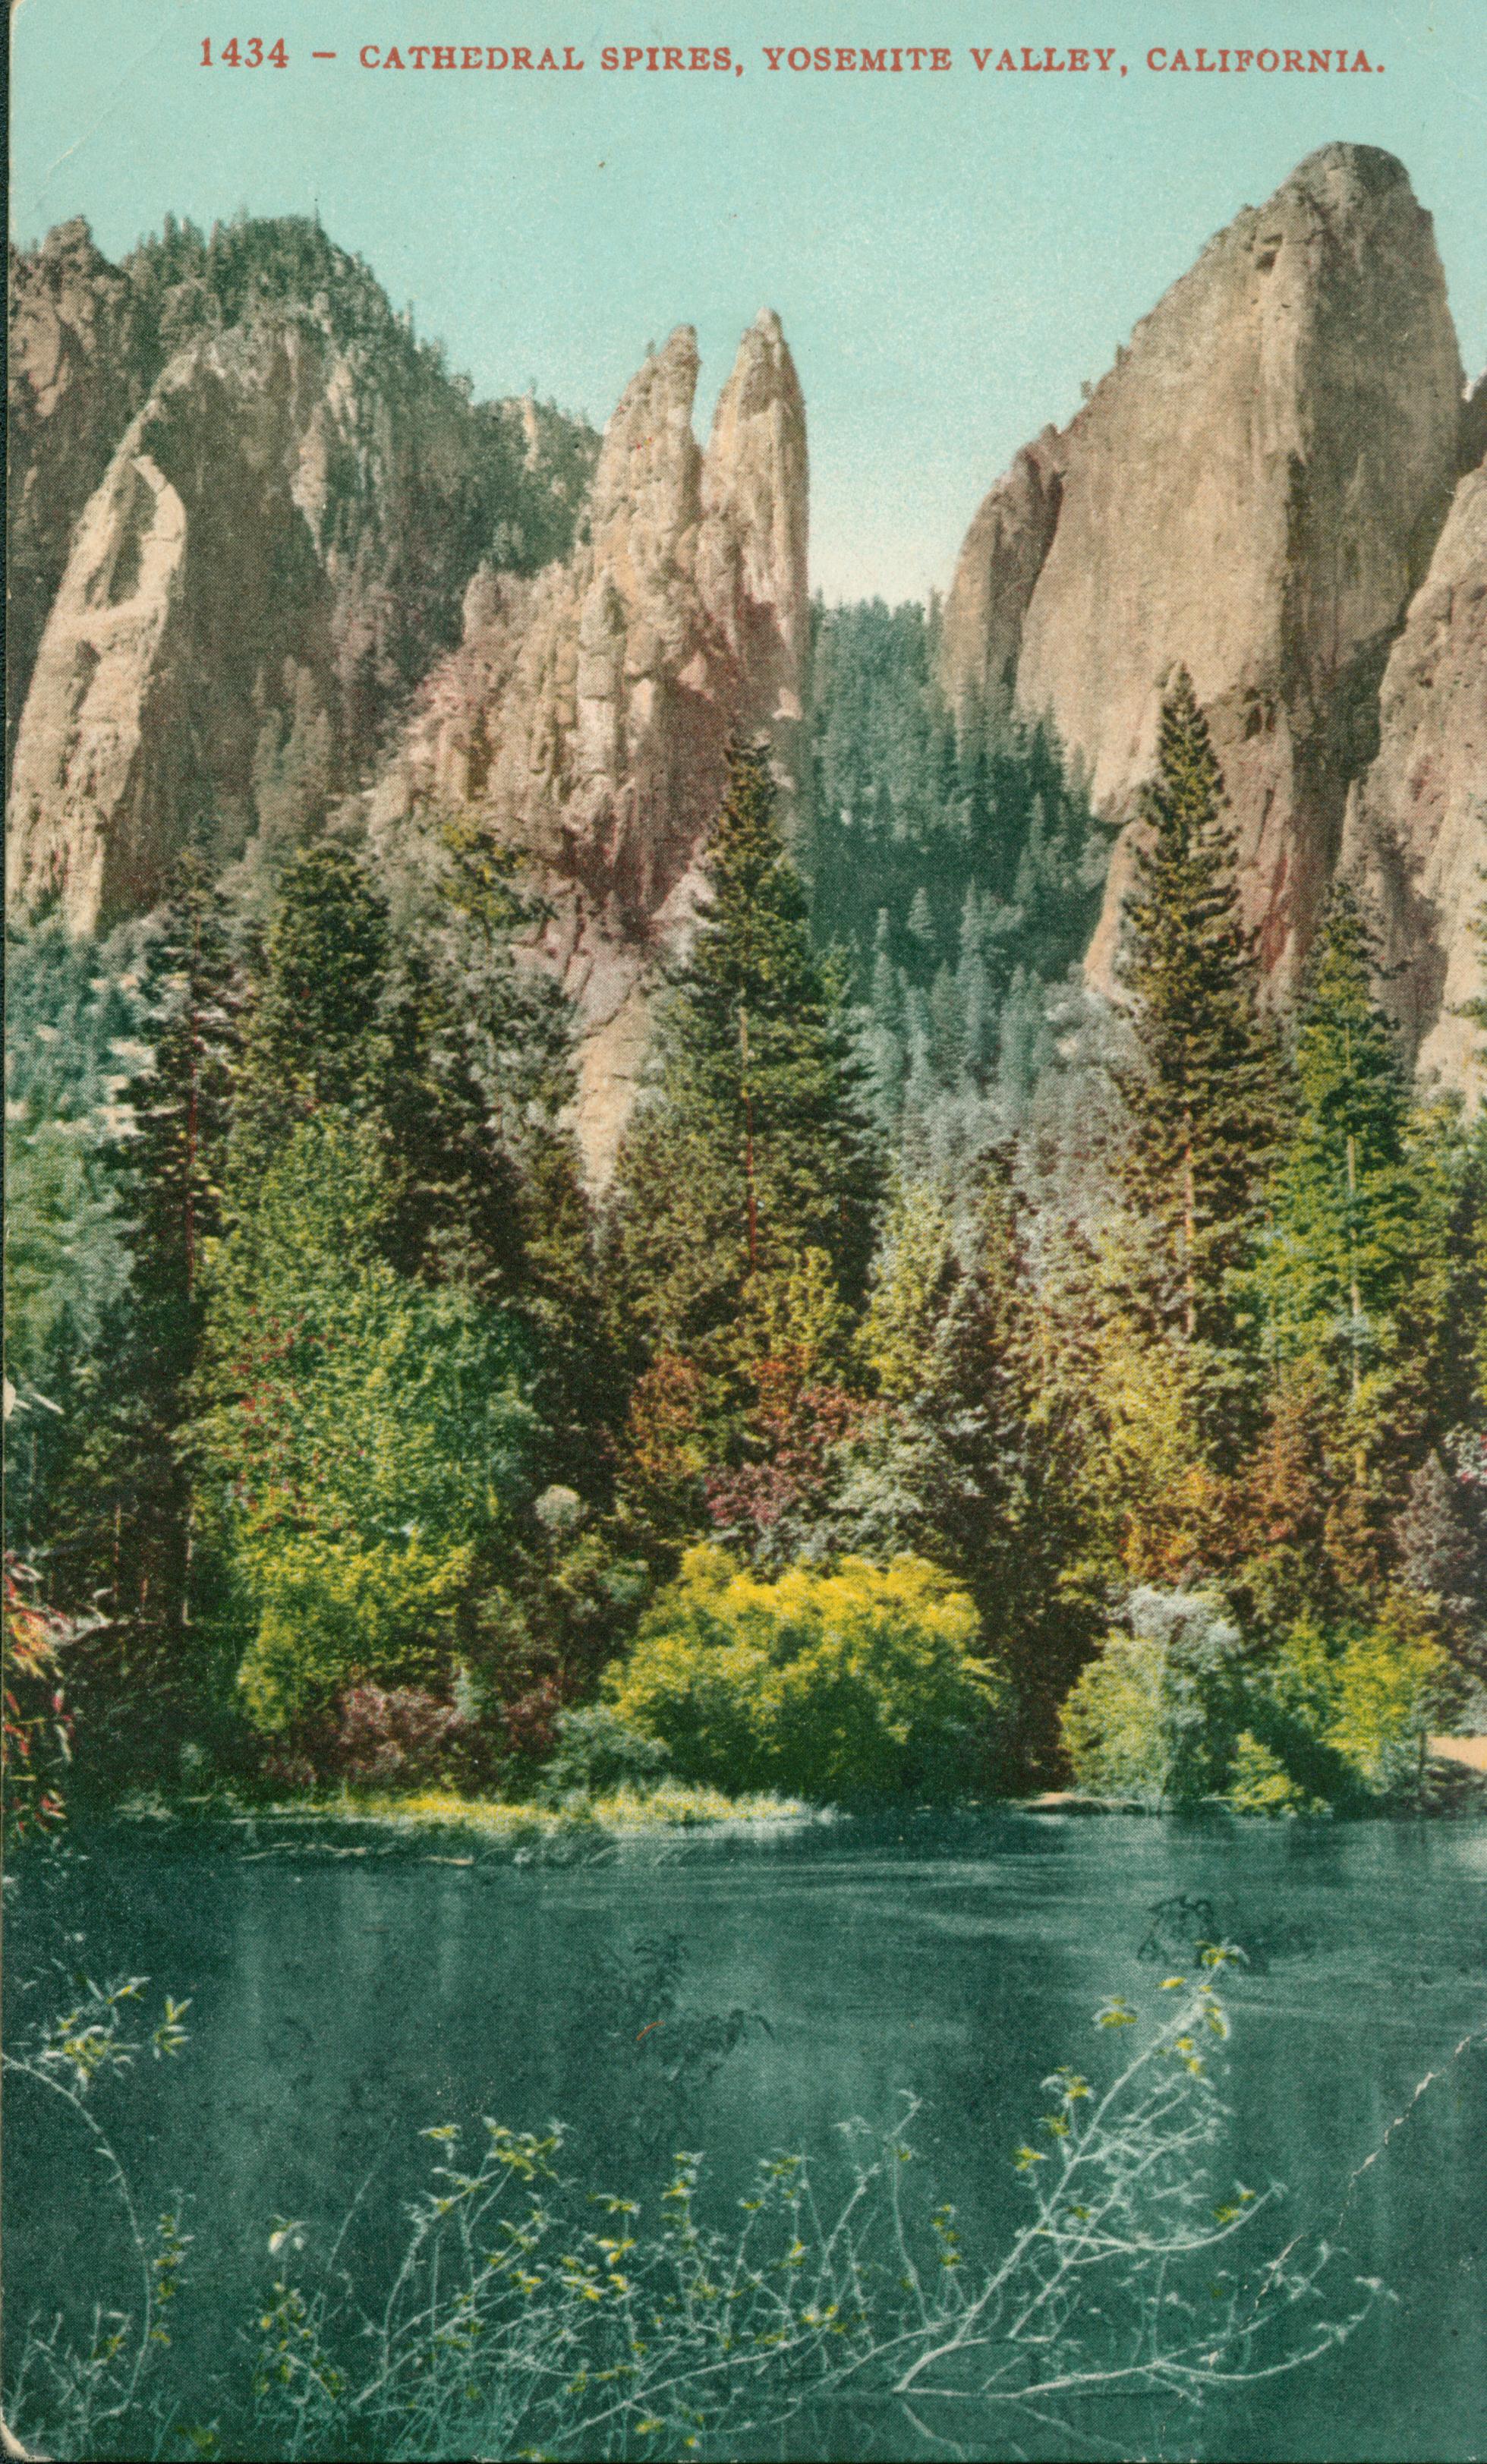 Shows Cathedral Spires with a grove of trees and a body of water in the foreground